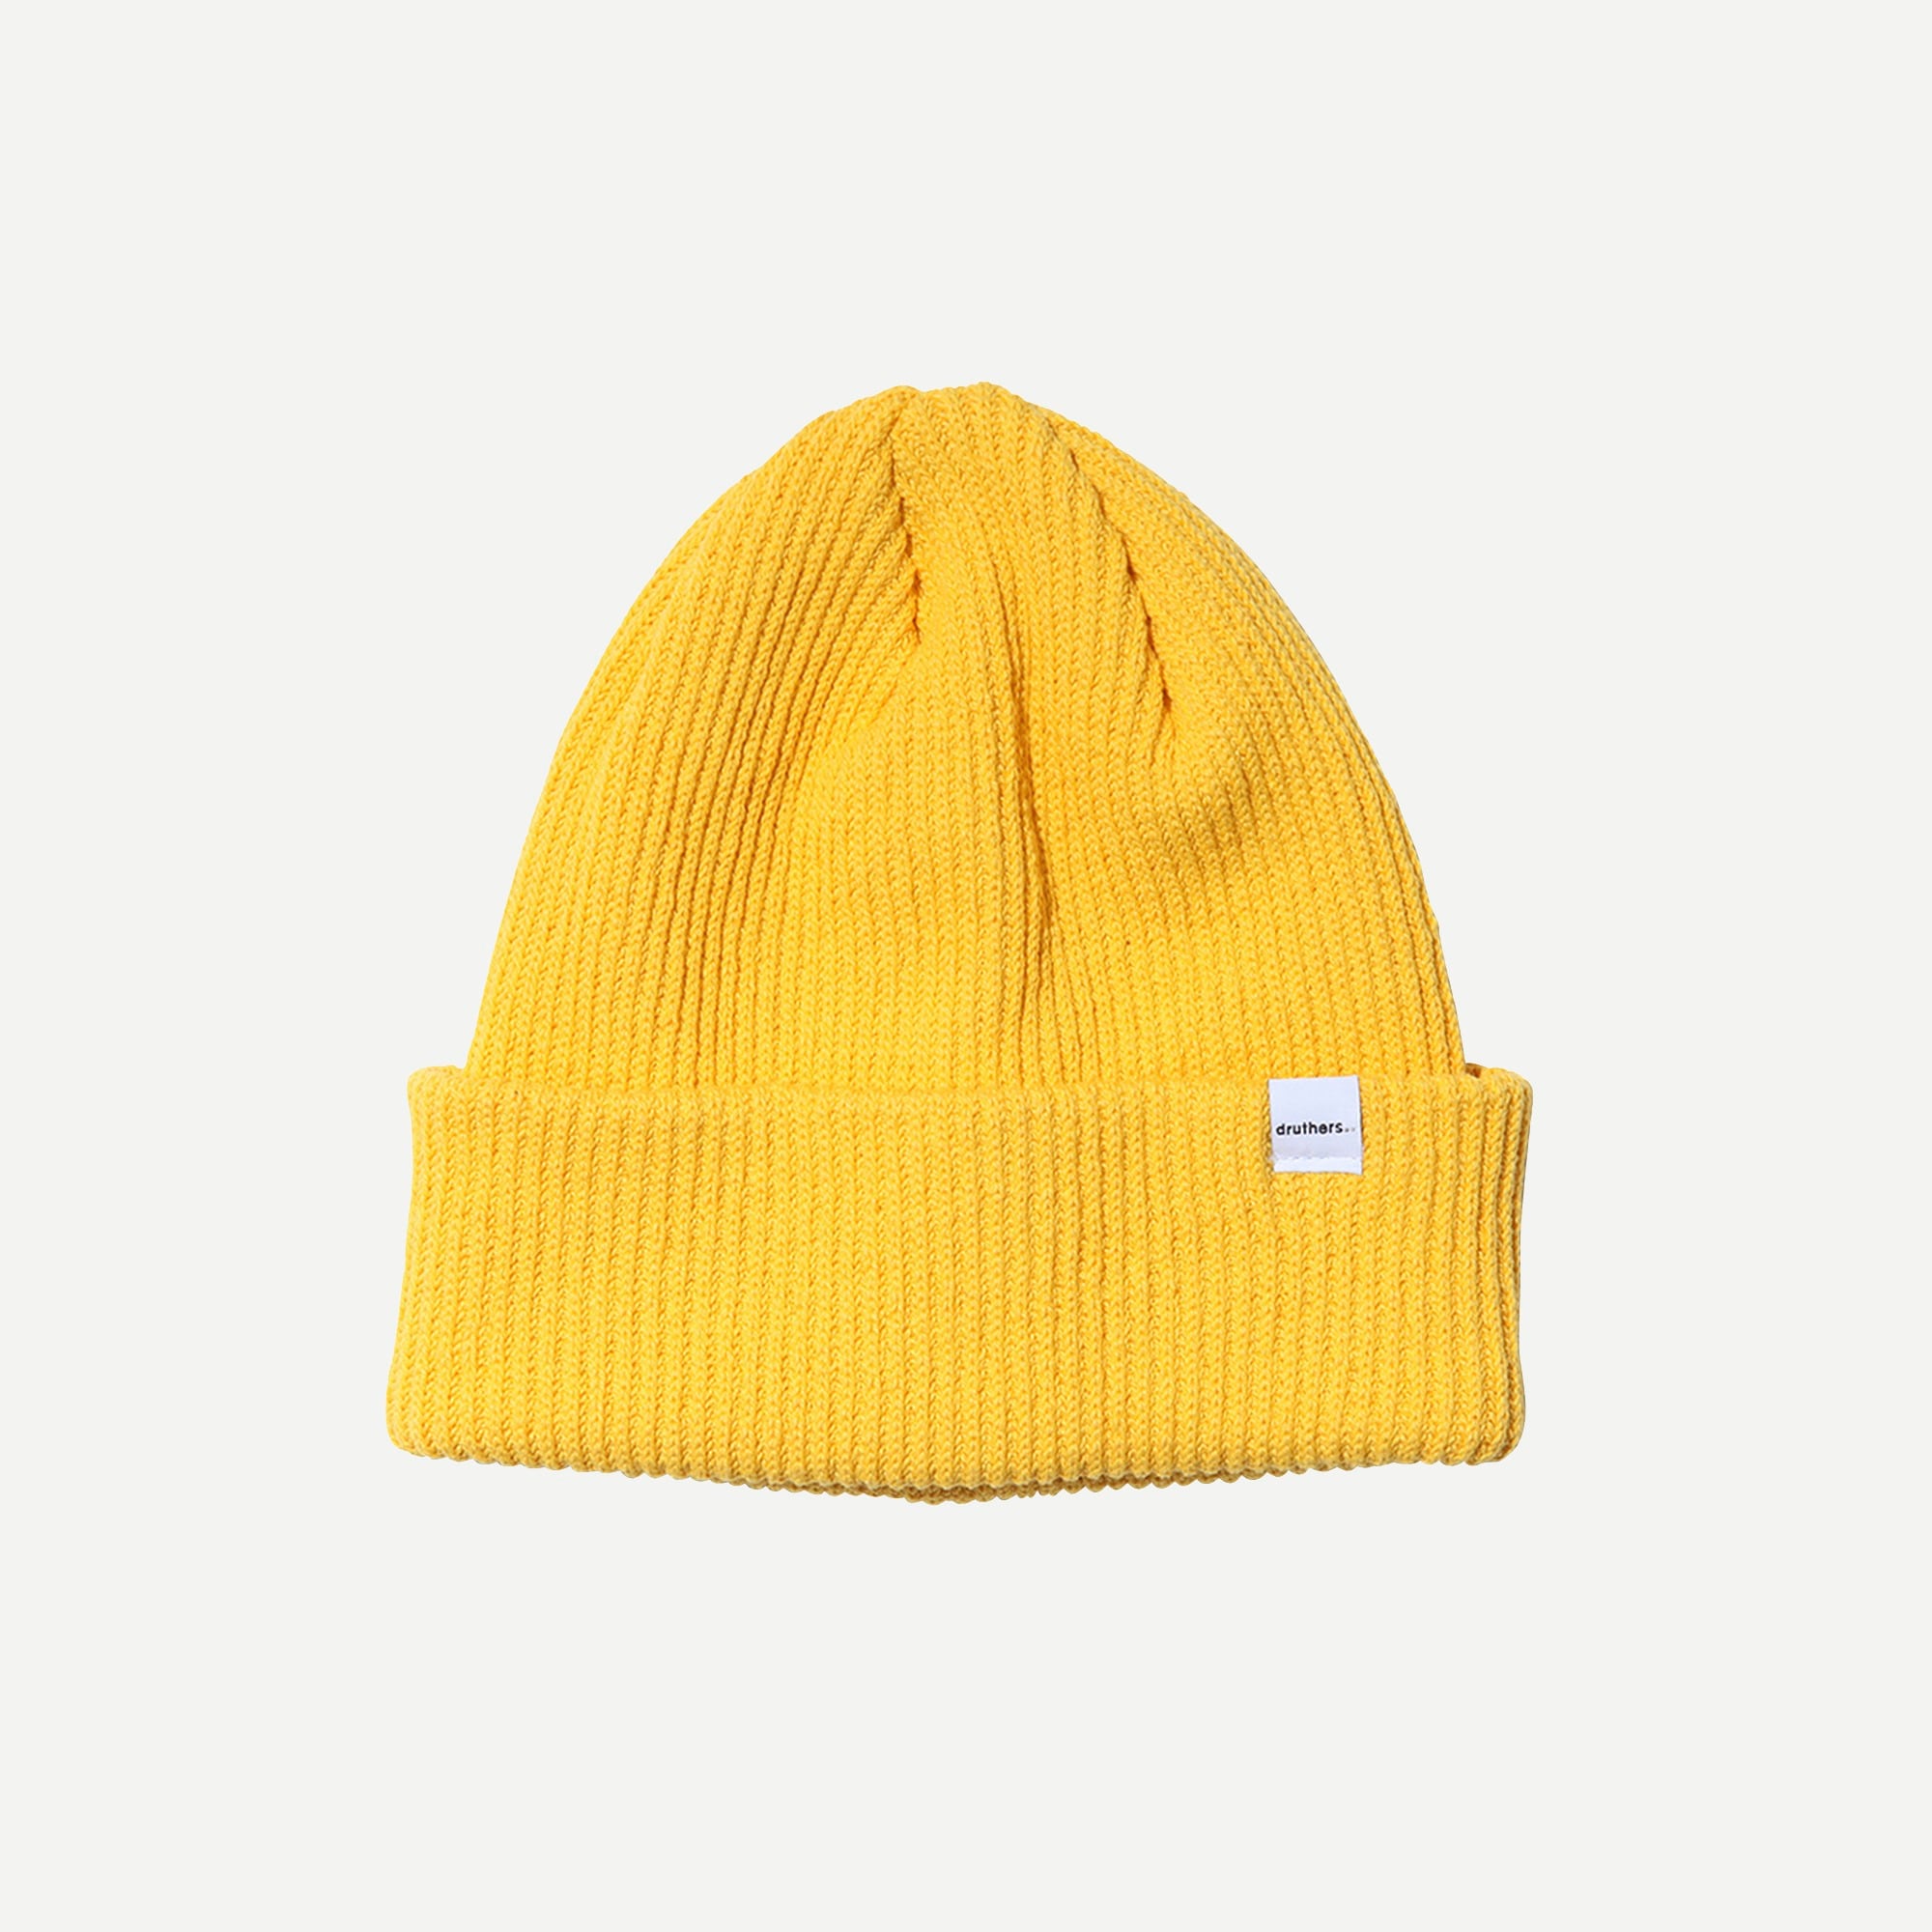  Druthers™ recycled cotton knit beanie